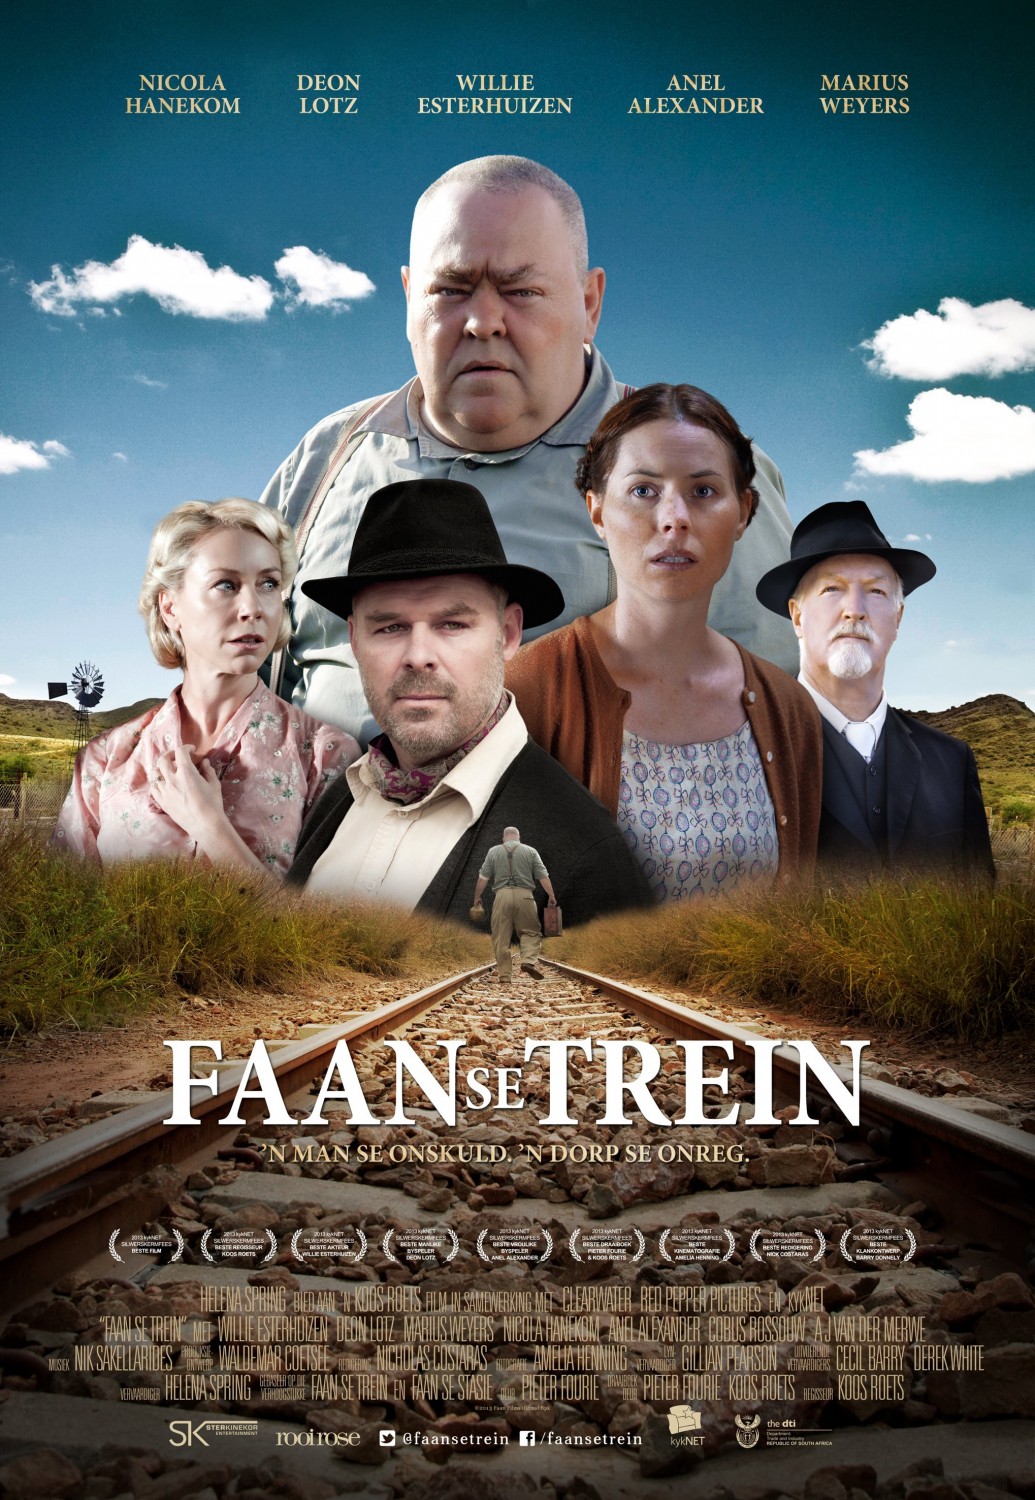 Extra Large Movie Poster Image for Faan se trein 